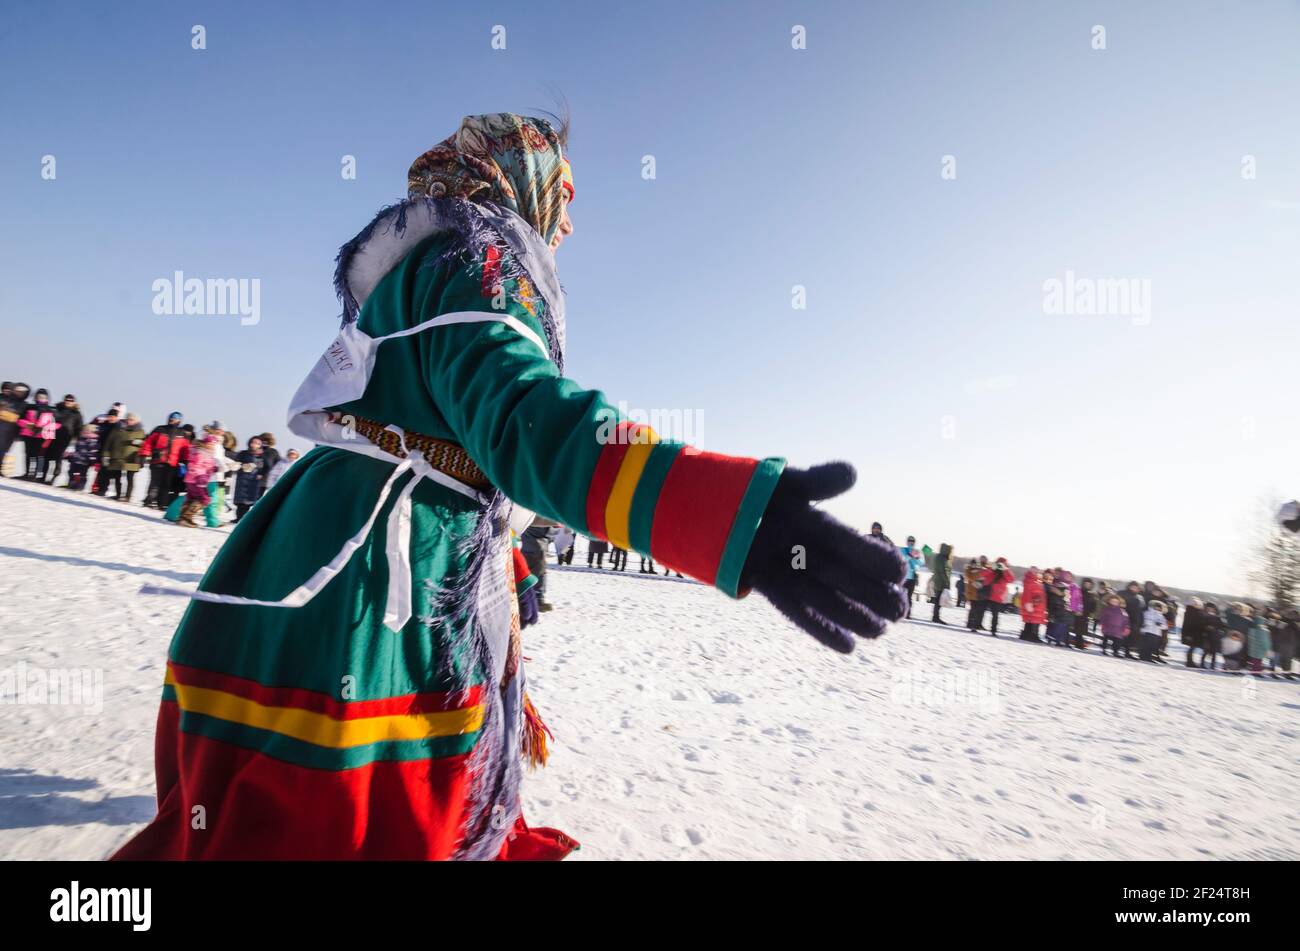 March, 2021 - Golubino. Competition for female reindeer herders. Deer Day. Russia, Arkhangelsk region Stock Photo